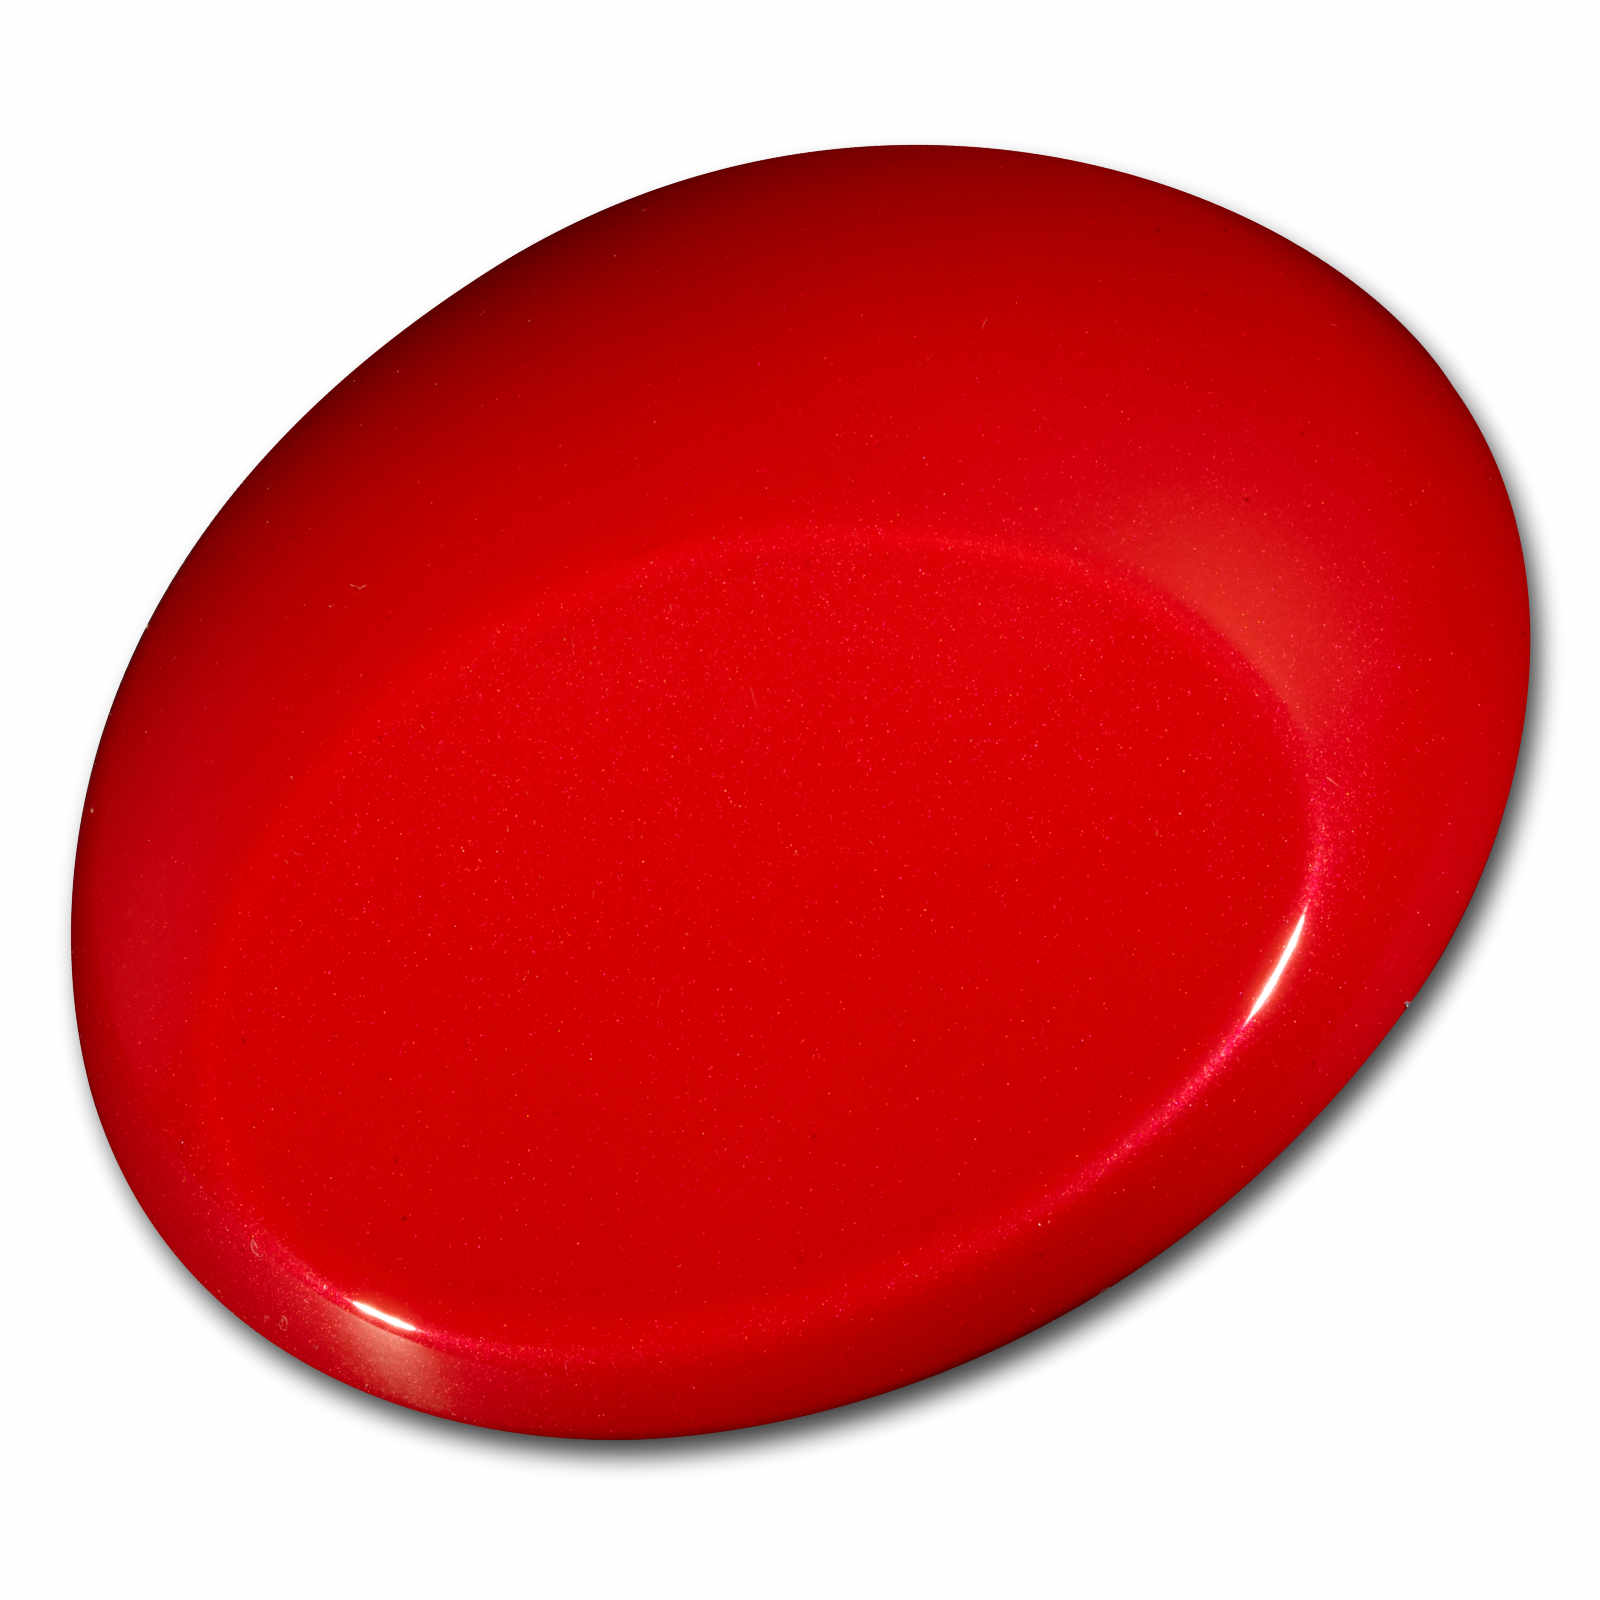 Createx Wicked Colors Pearl Red, 2 oz.: Anest Iwata-Medea, Inc.